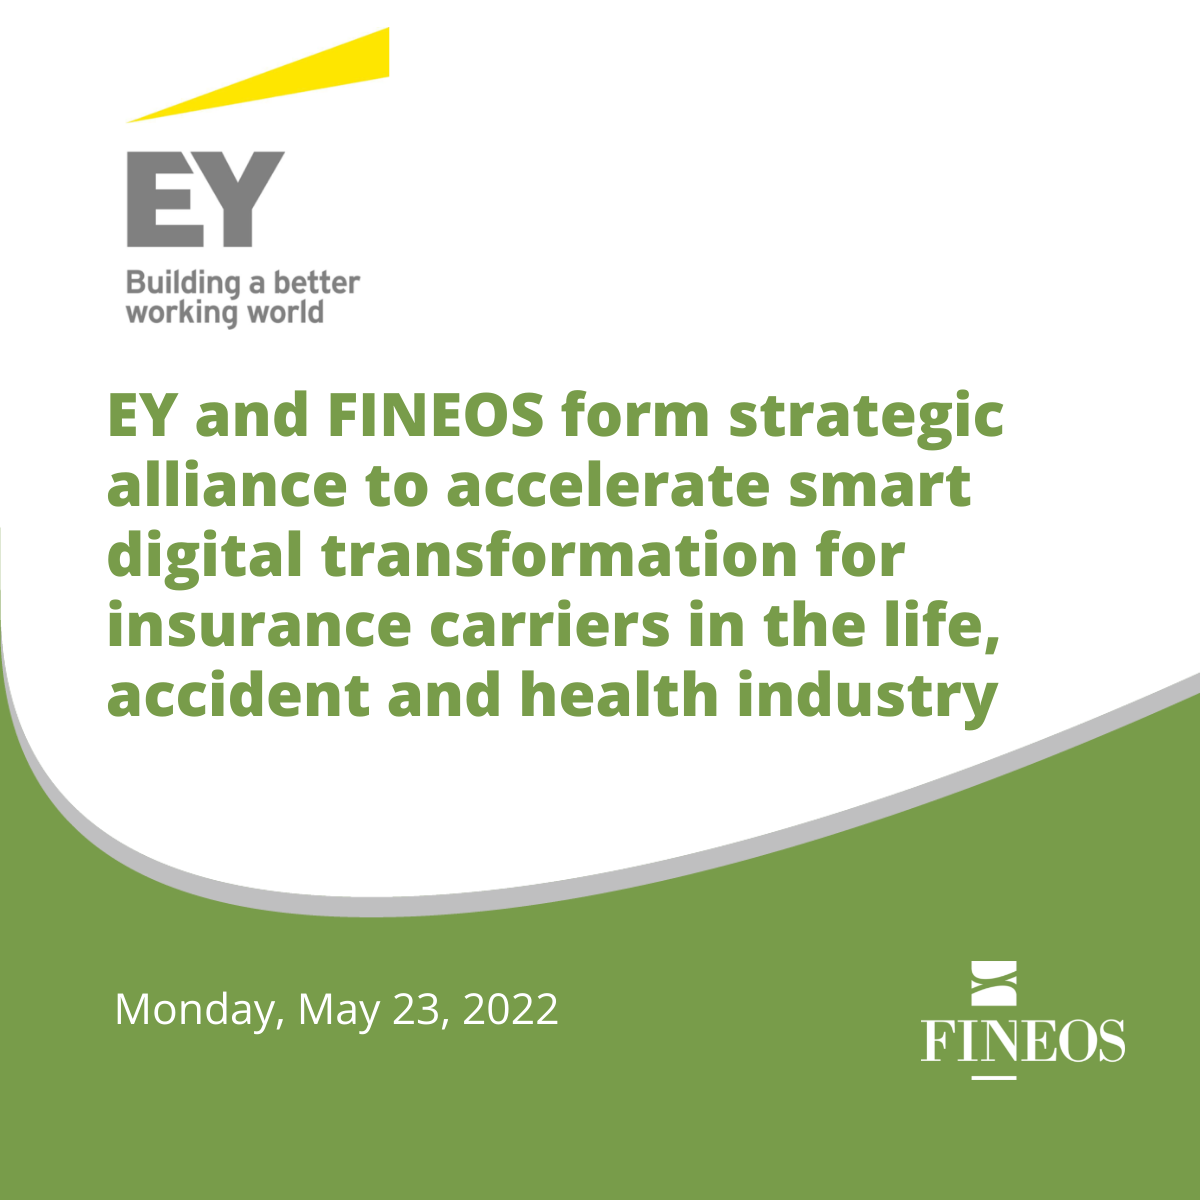 EY and FINEOS form strategic alliance to accelerate smart digital transformation for insurance carriers in the life, accident and health industry